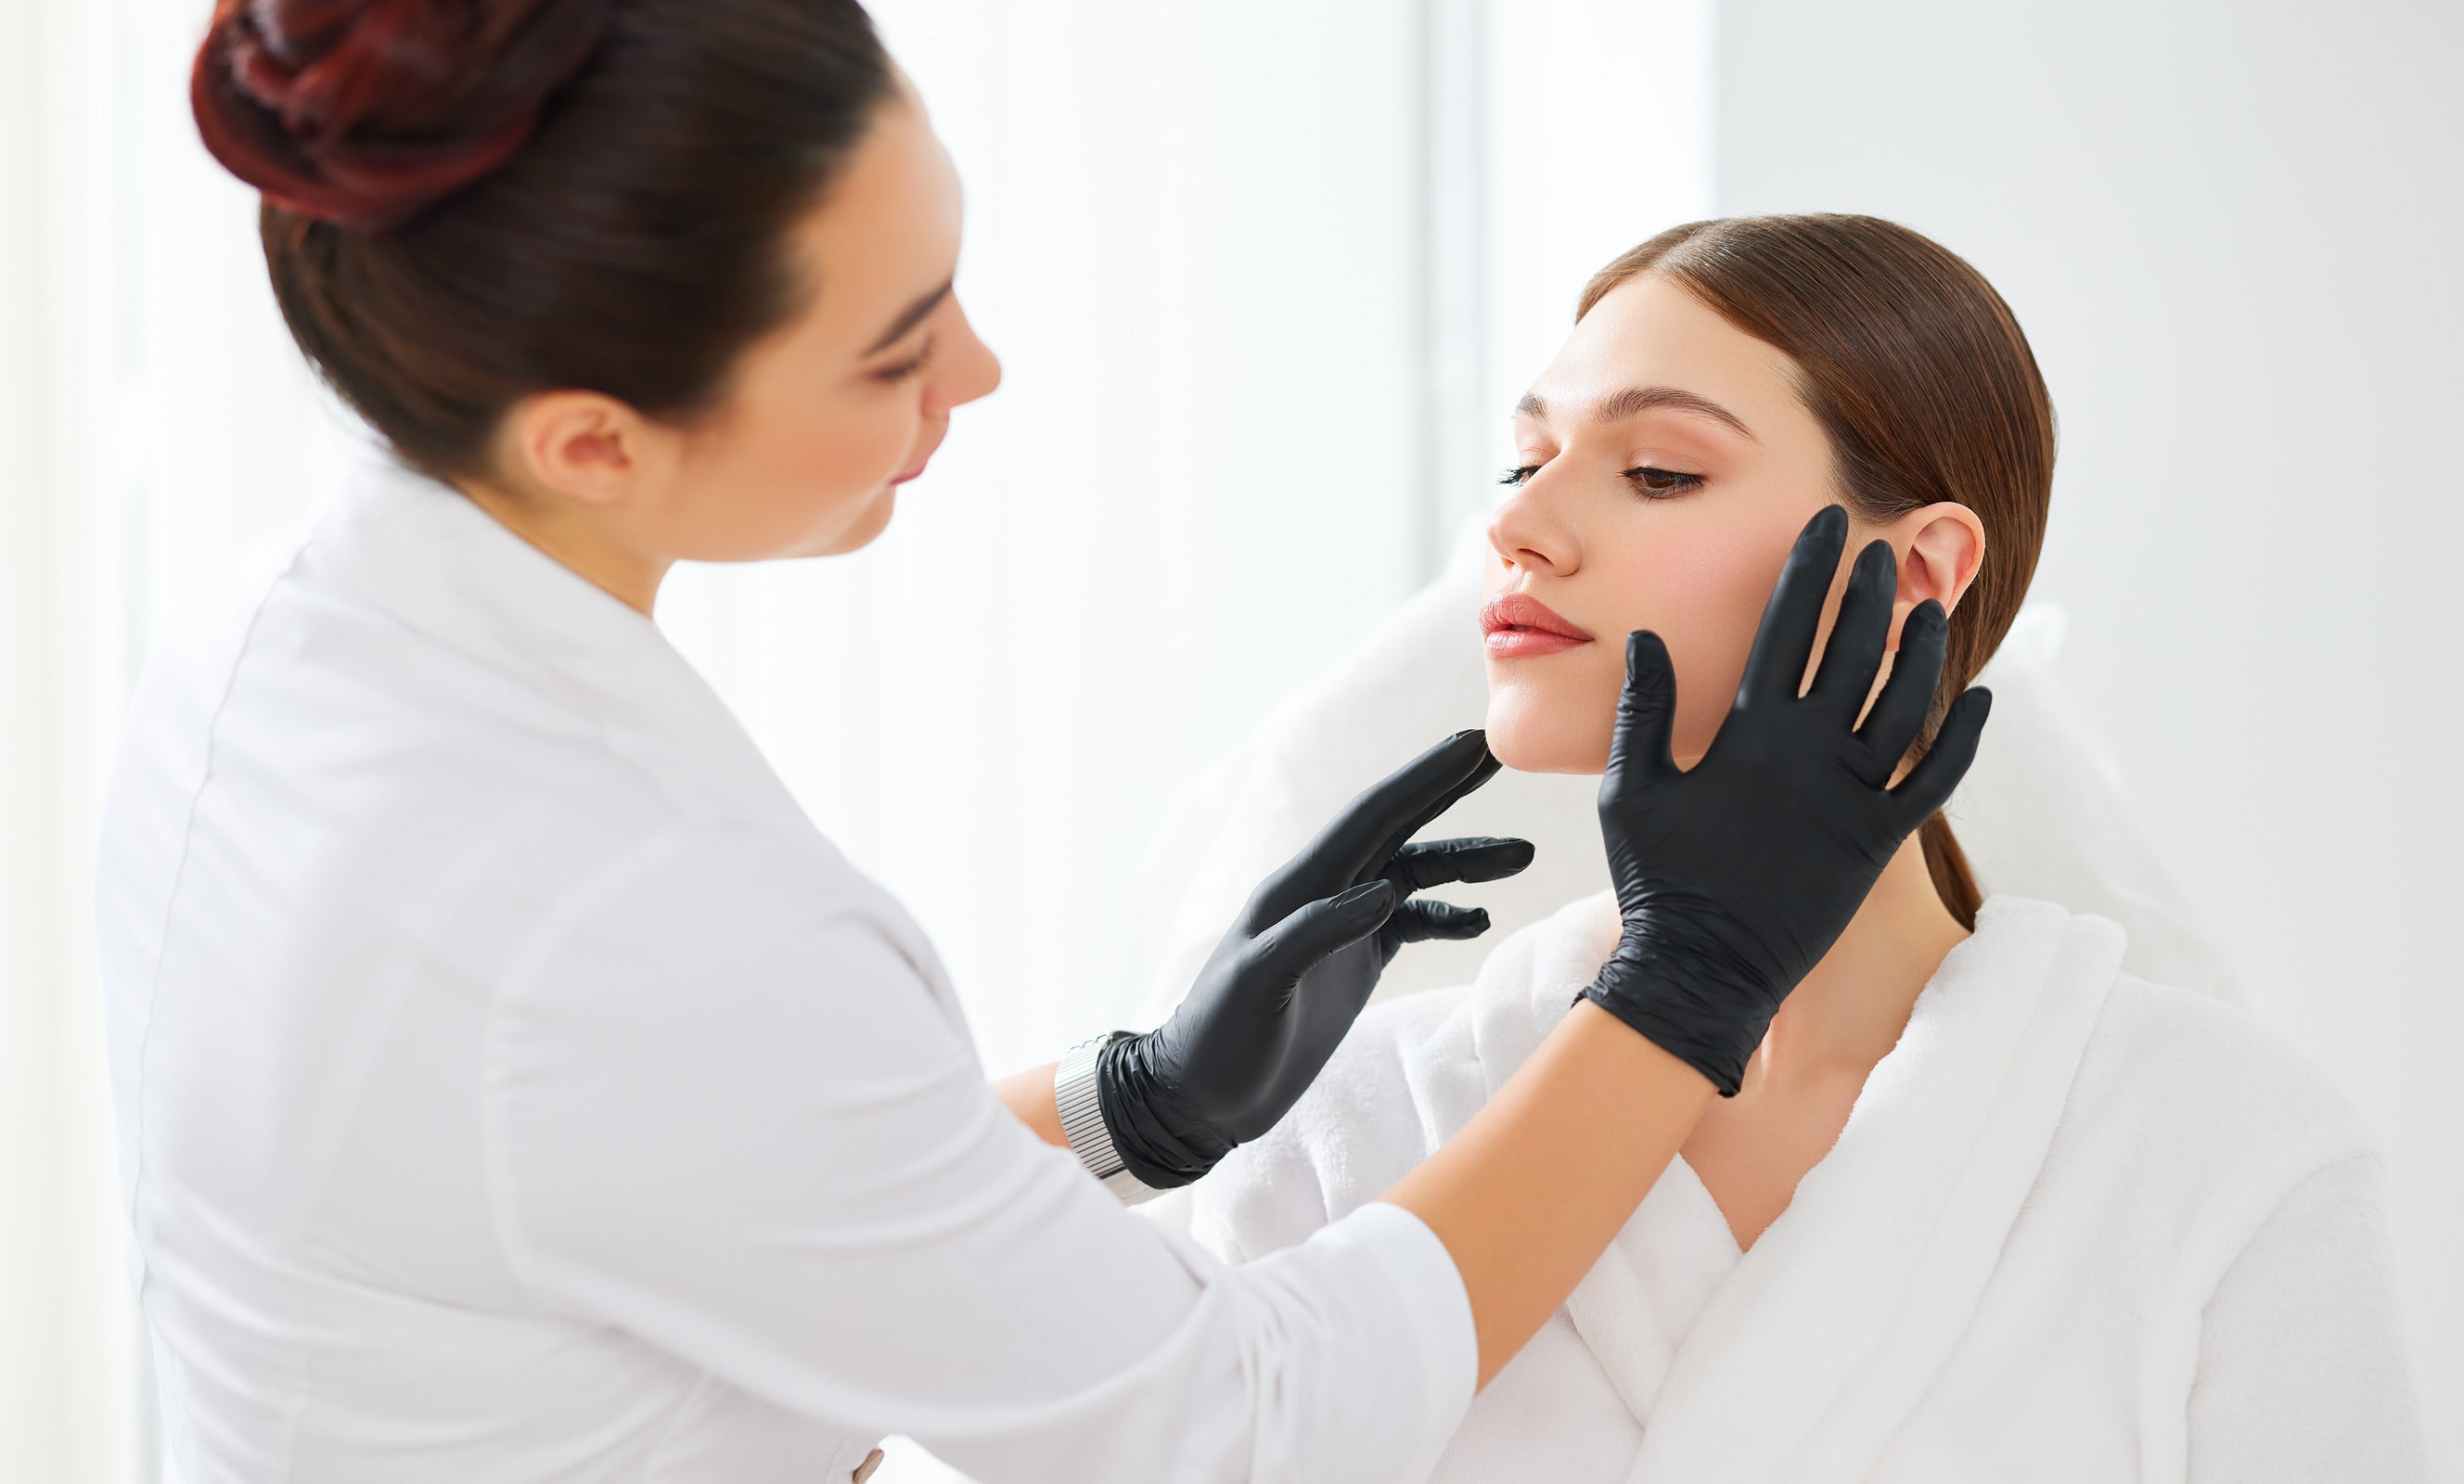 A consultation with a tattoo artist and a botox specialist